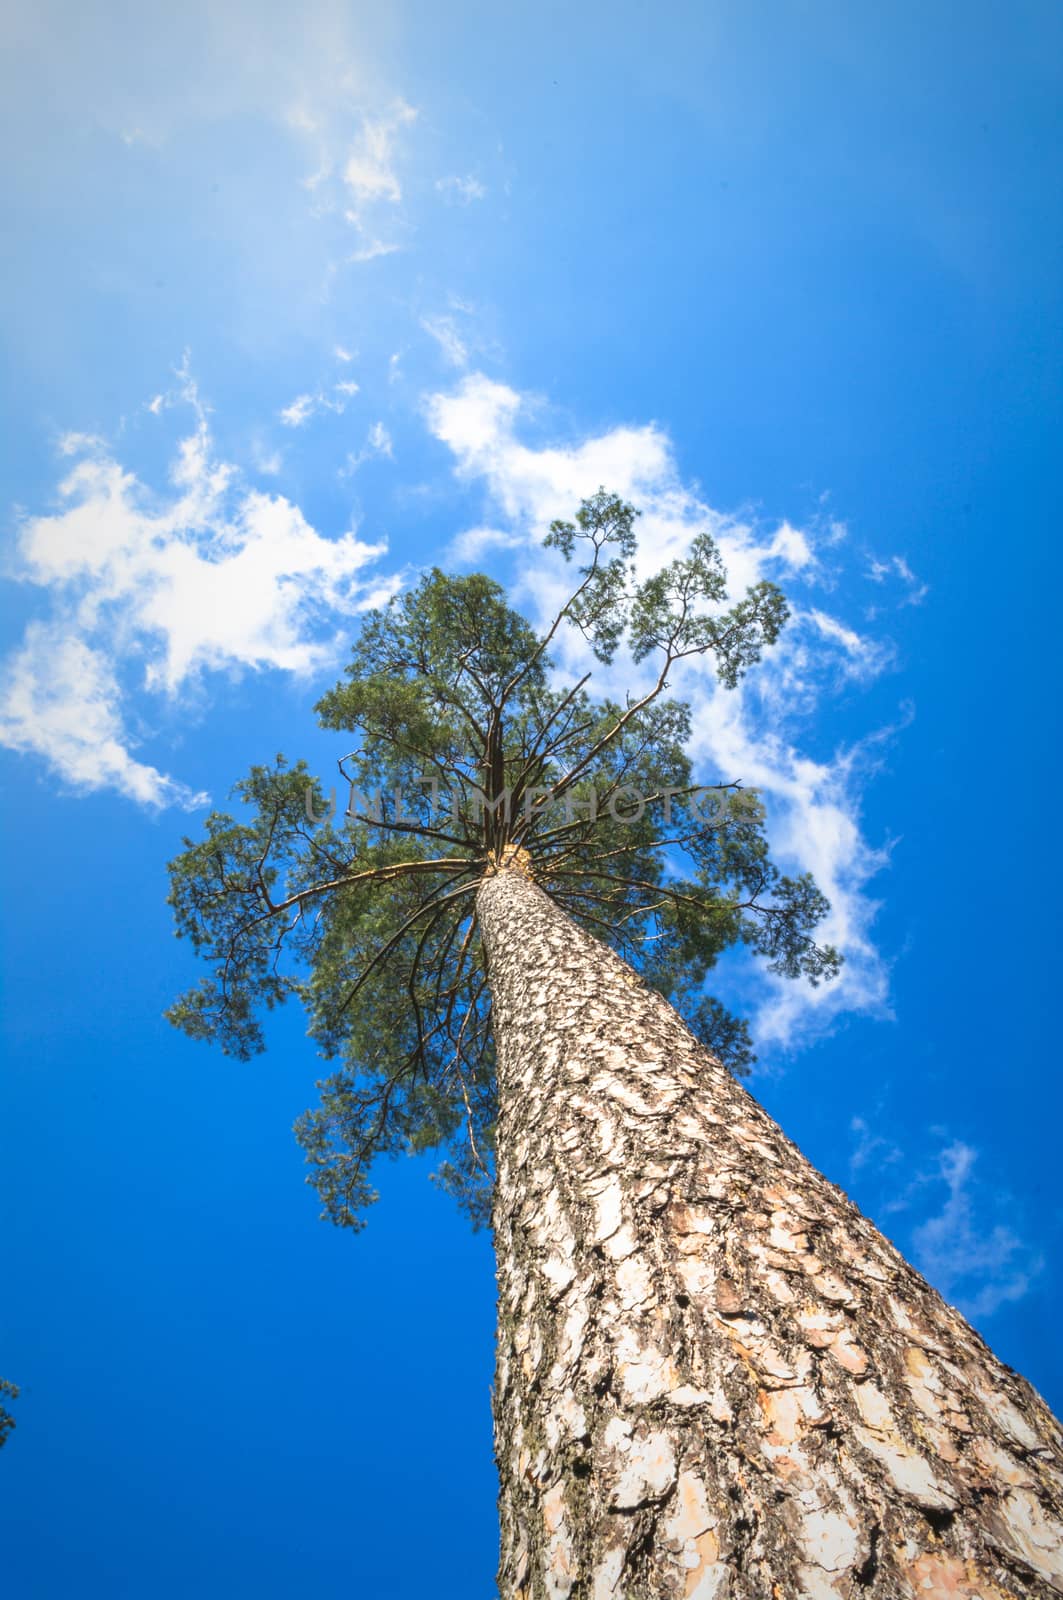 old big tree on color background with blue sky, nature series